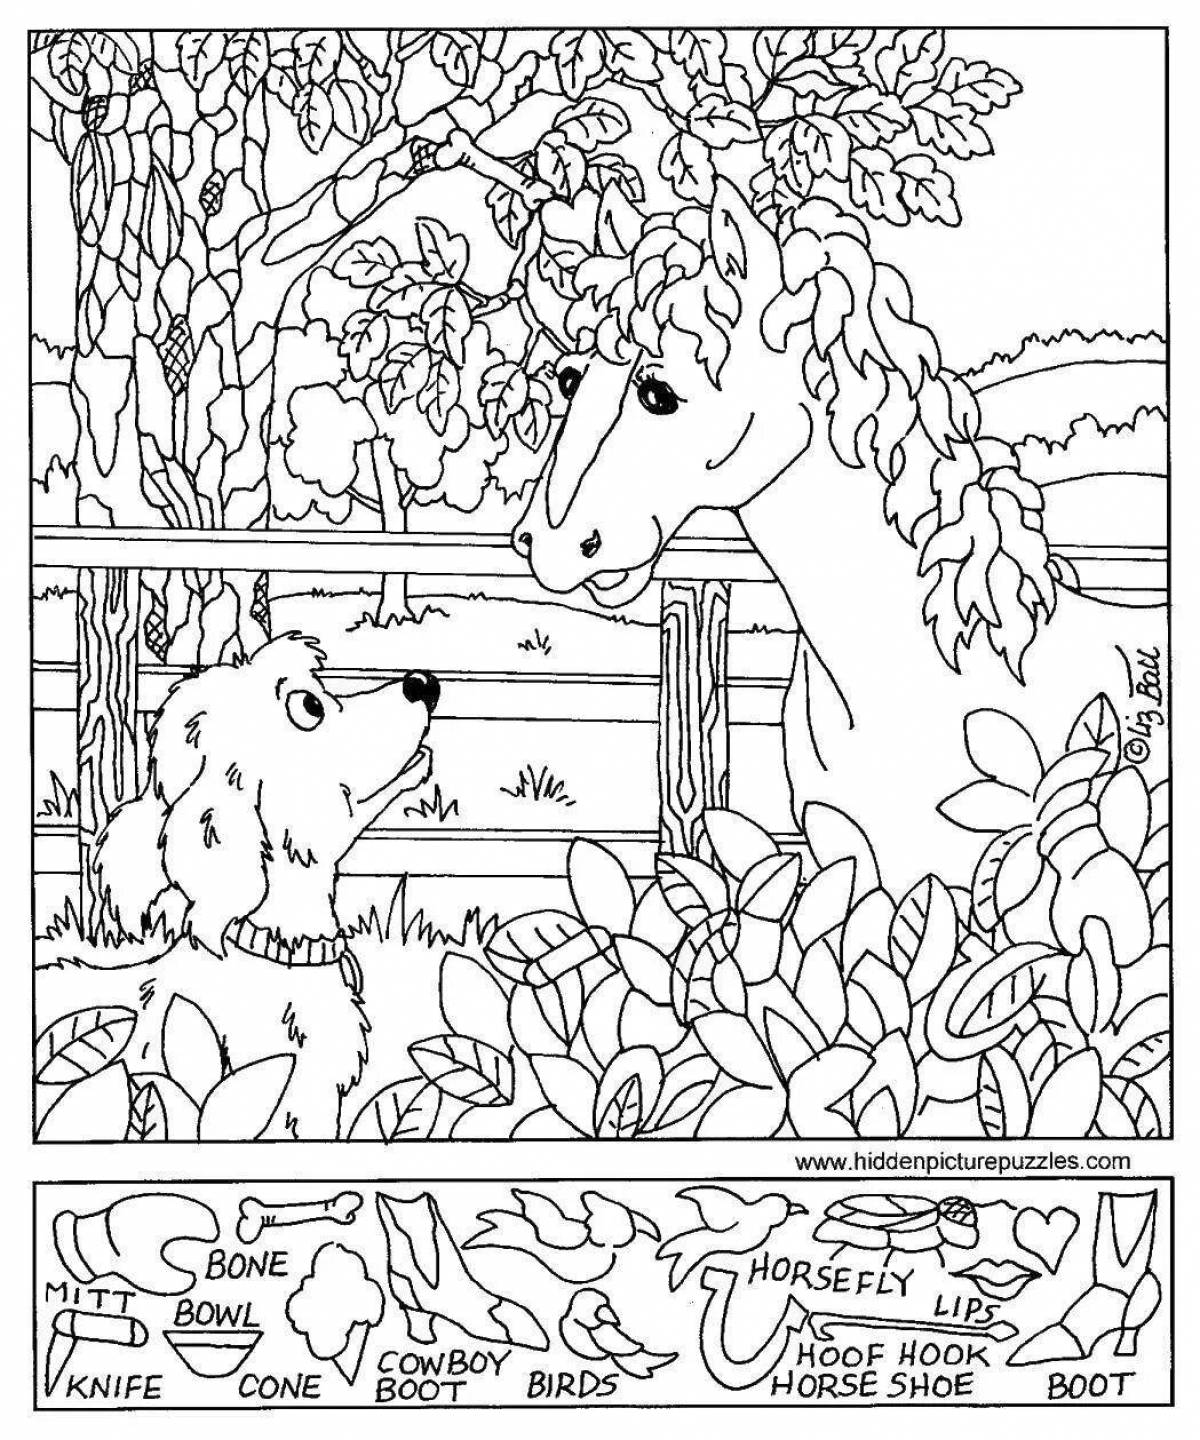 Entertaining coloring search objects